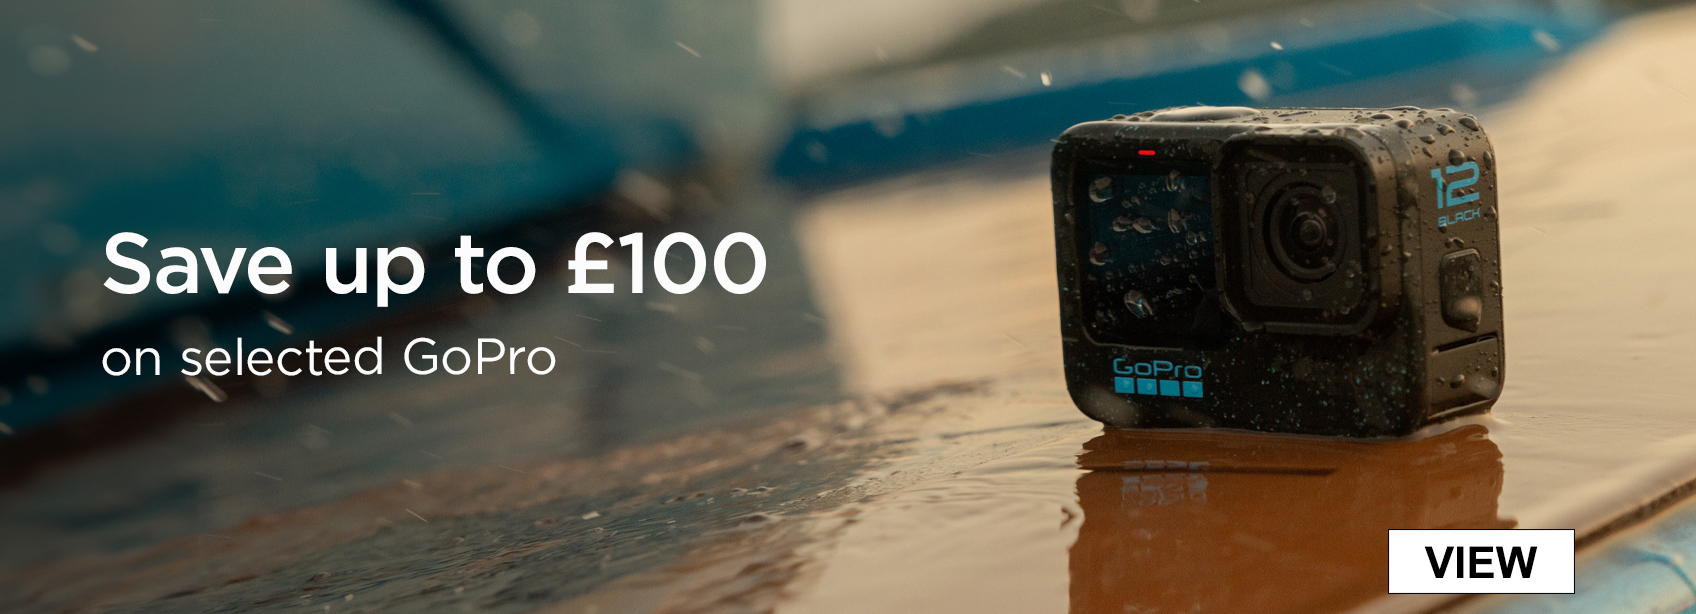 Save up to £100 on selected GoPro